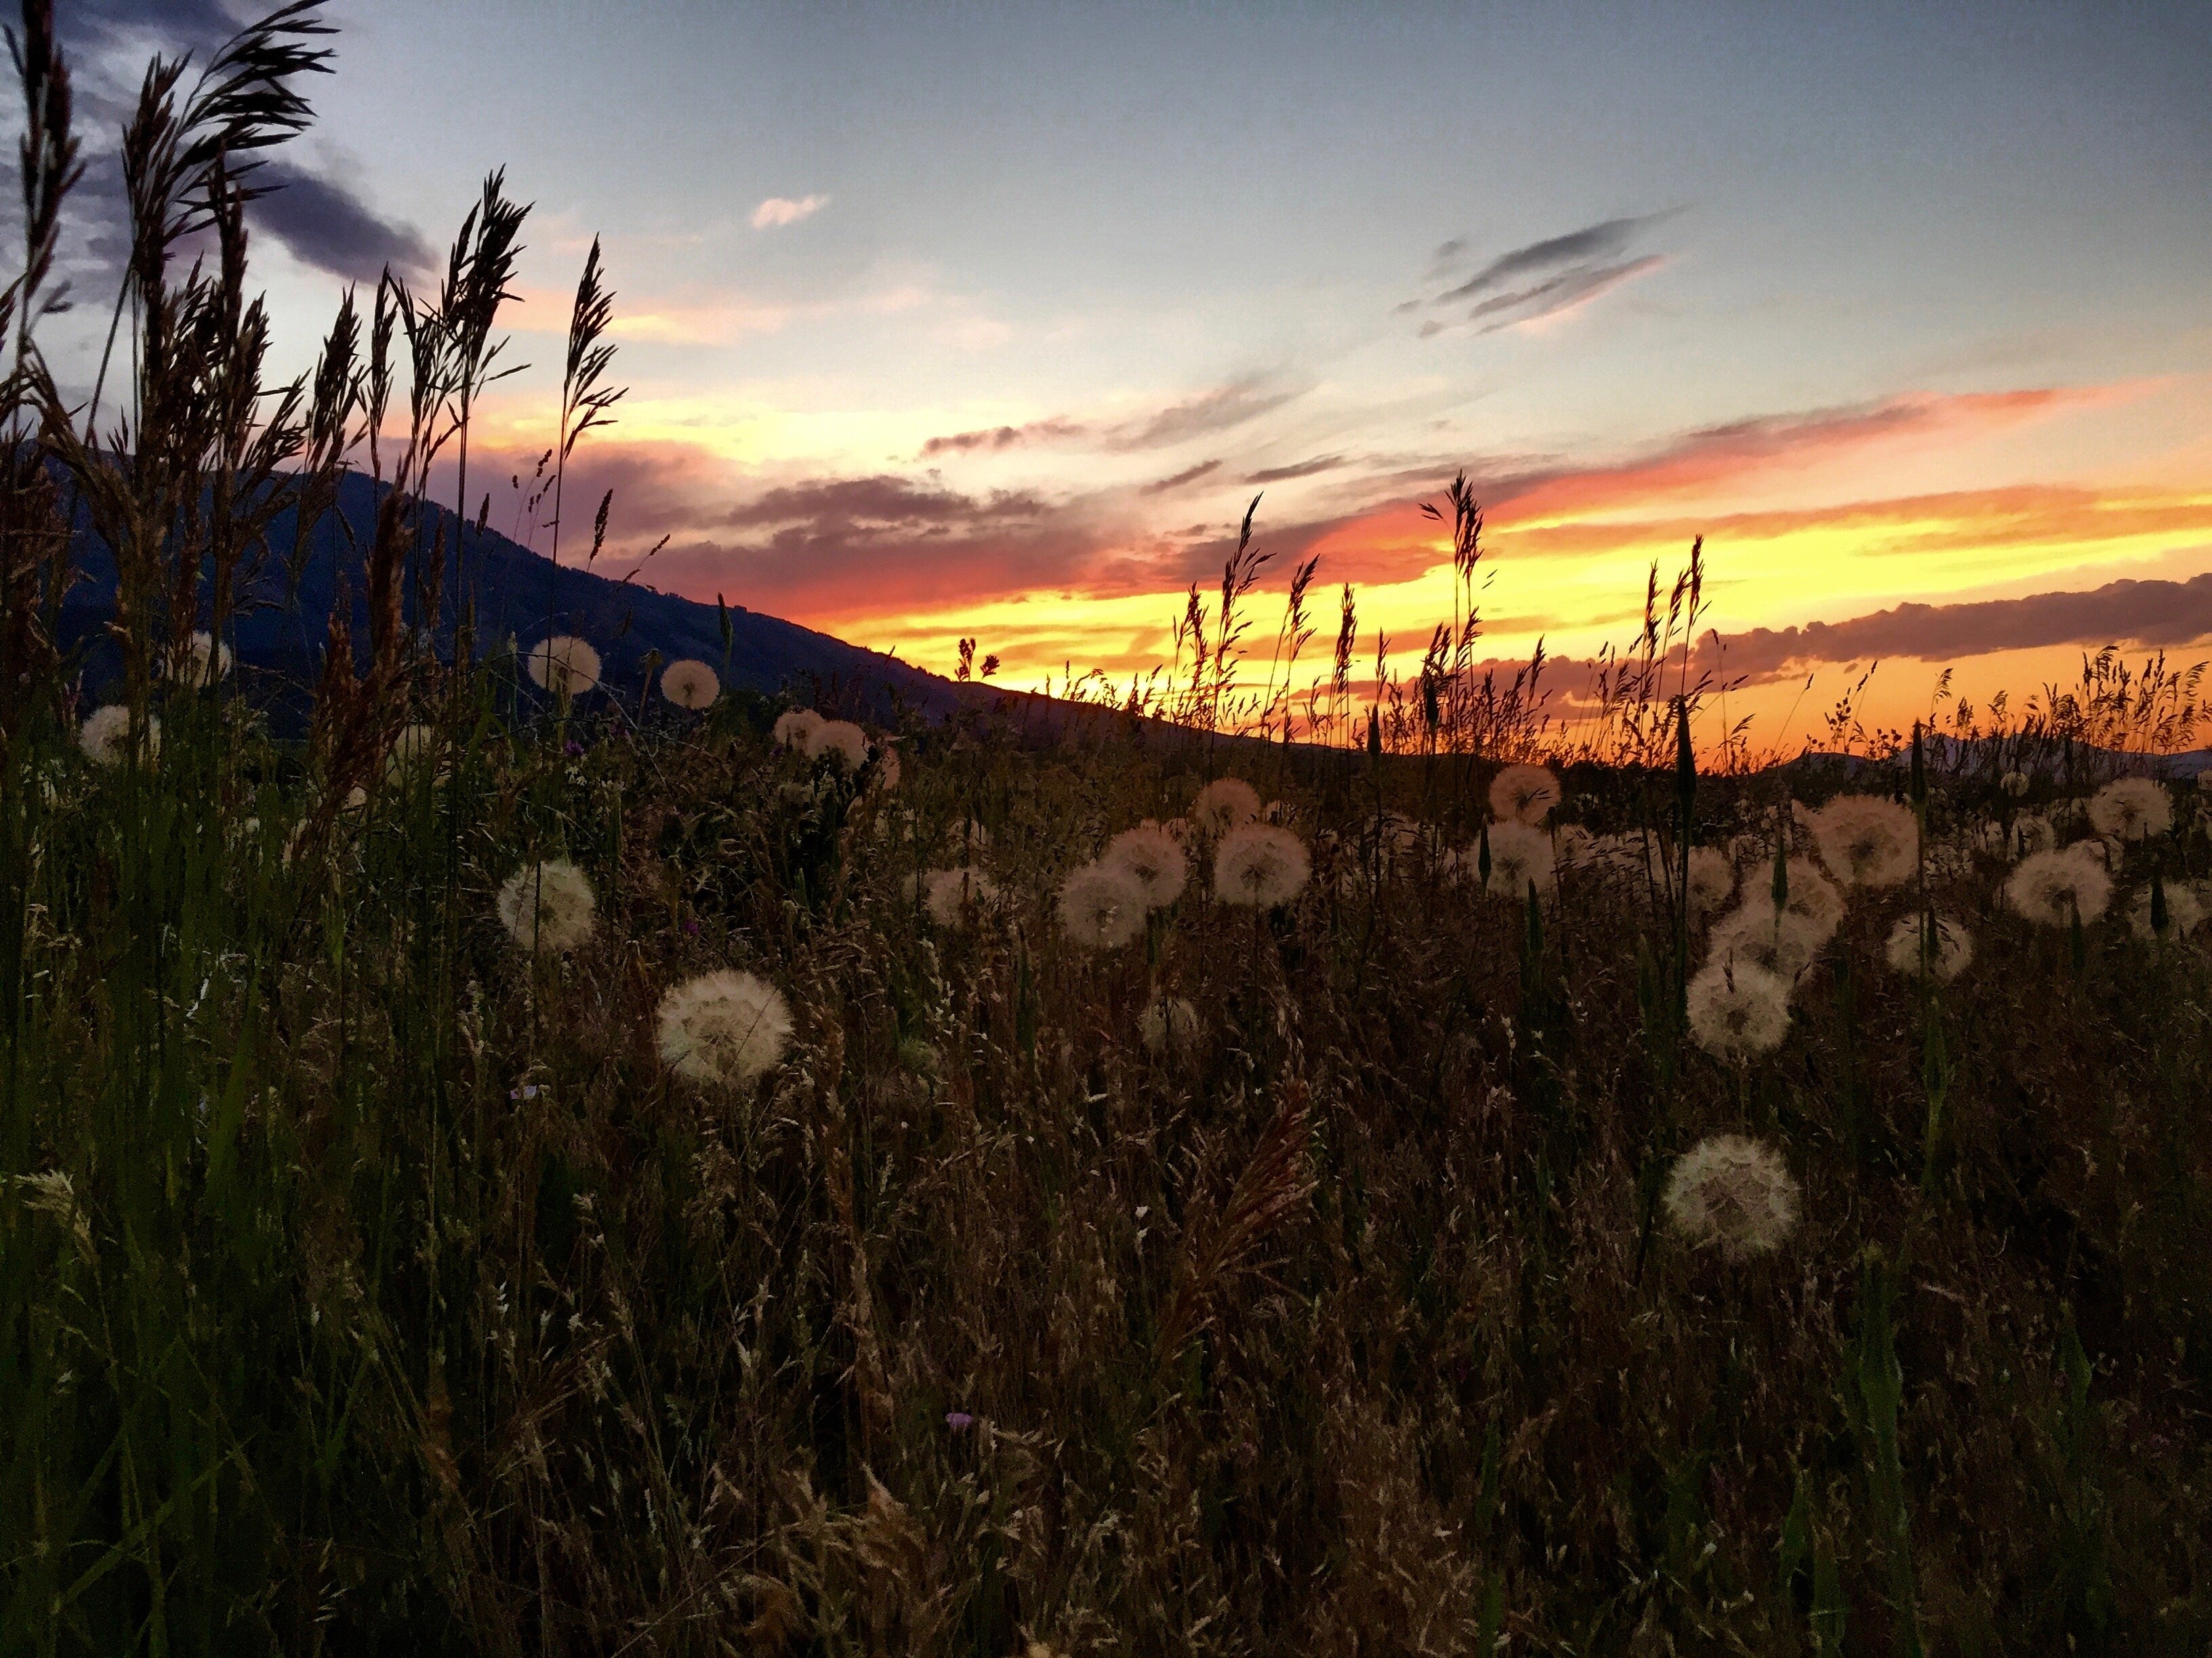 Sunset and dandilions